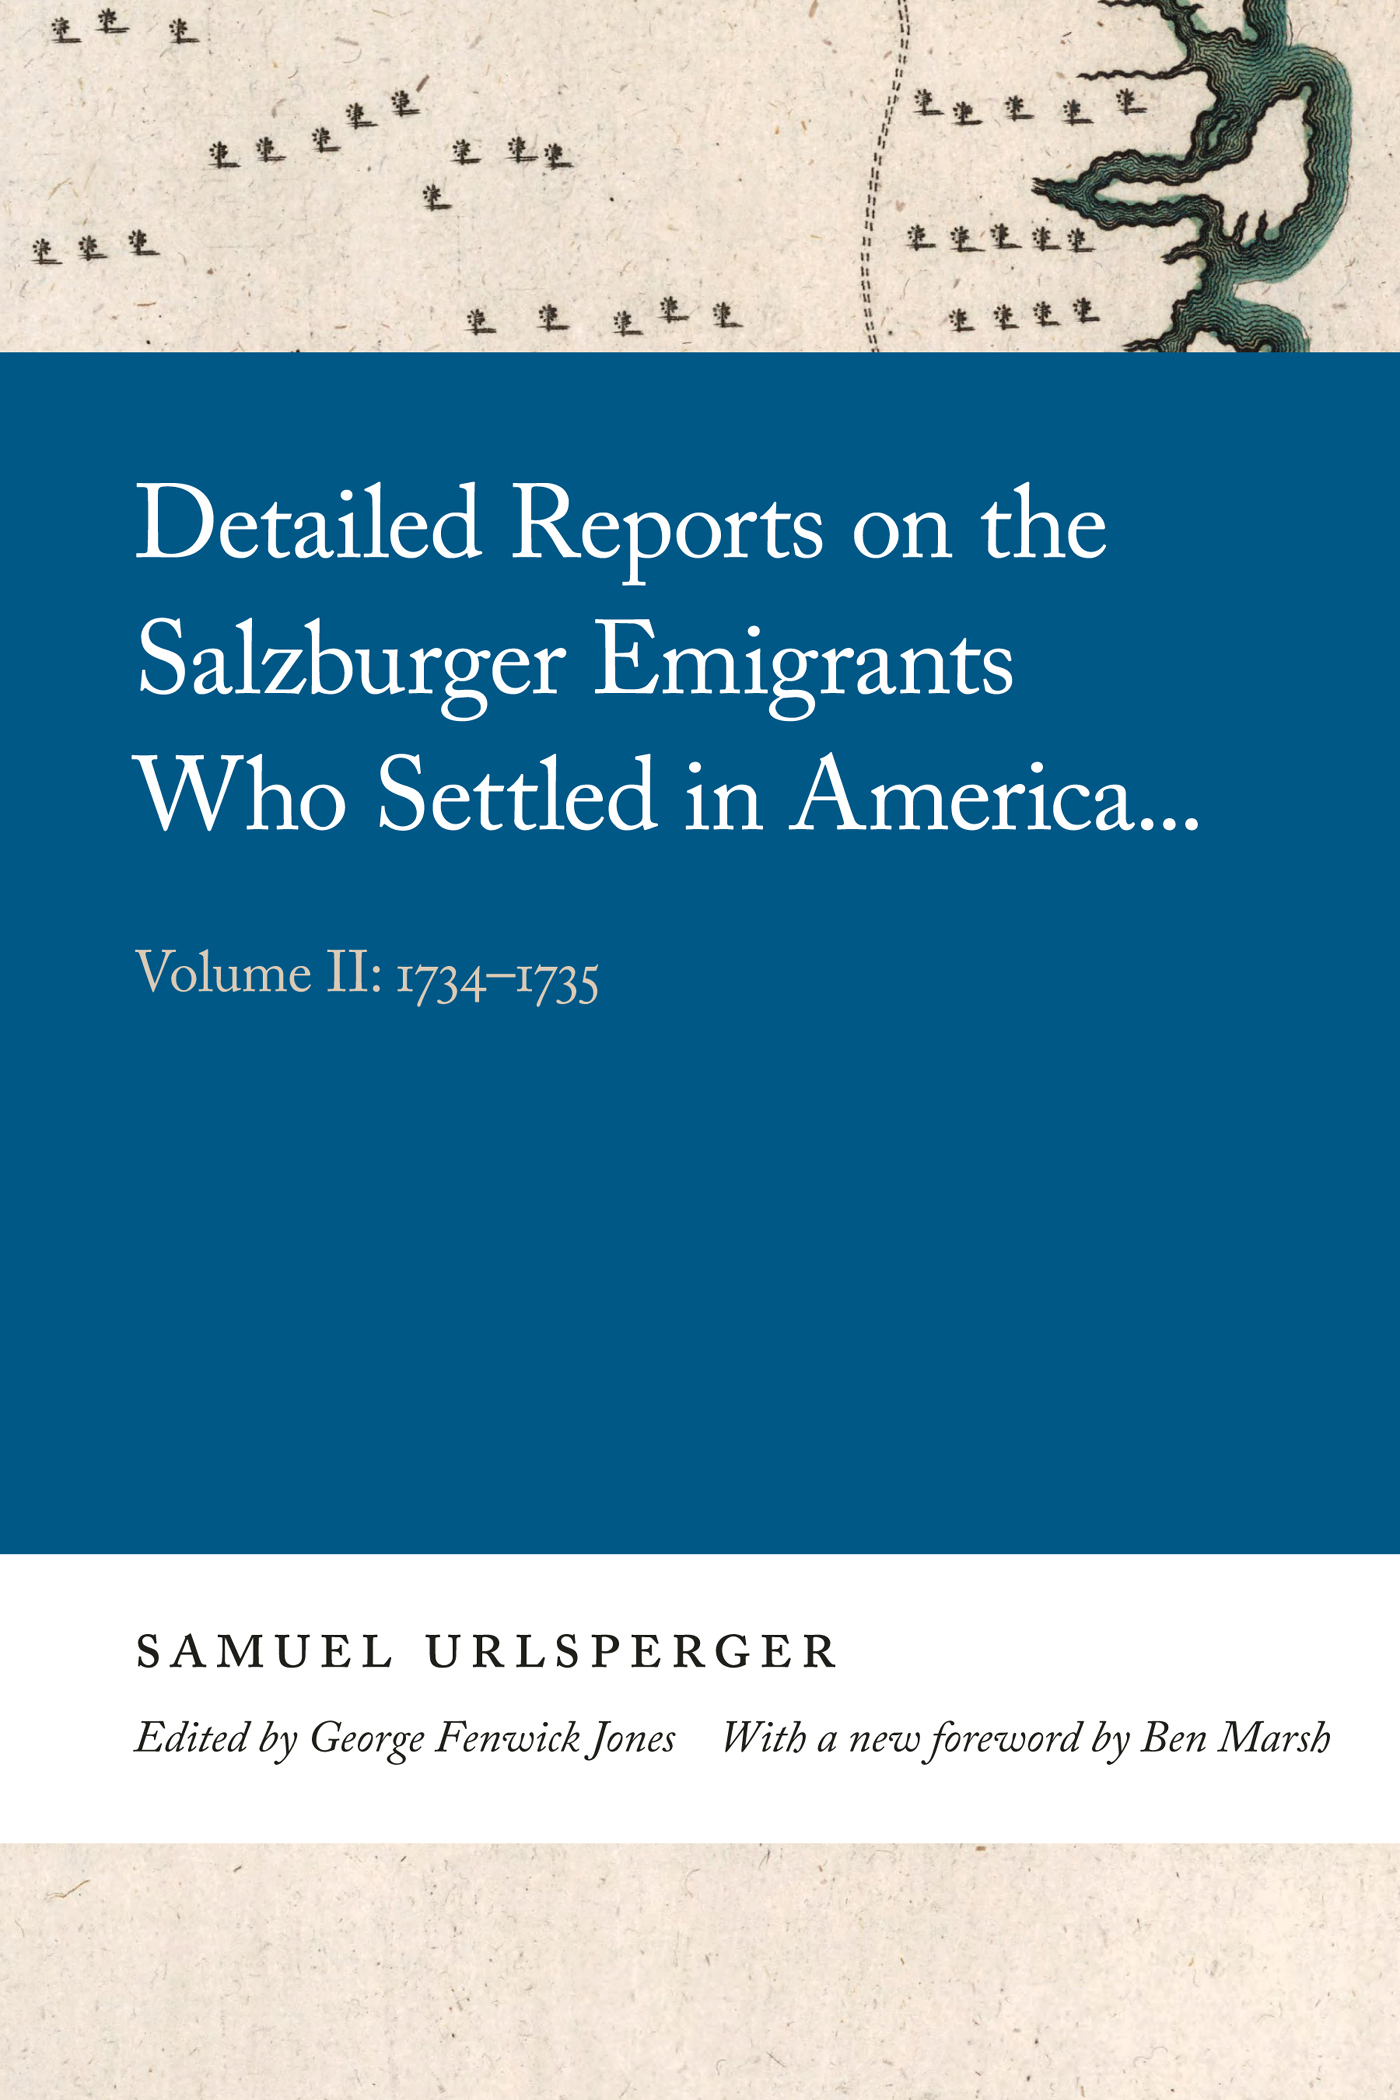 Cover page of the book “Detailed Reports on the Salzburger Emigrants Who Settled in America, Volume 2.”